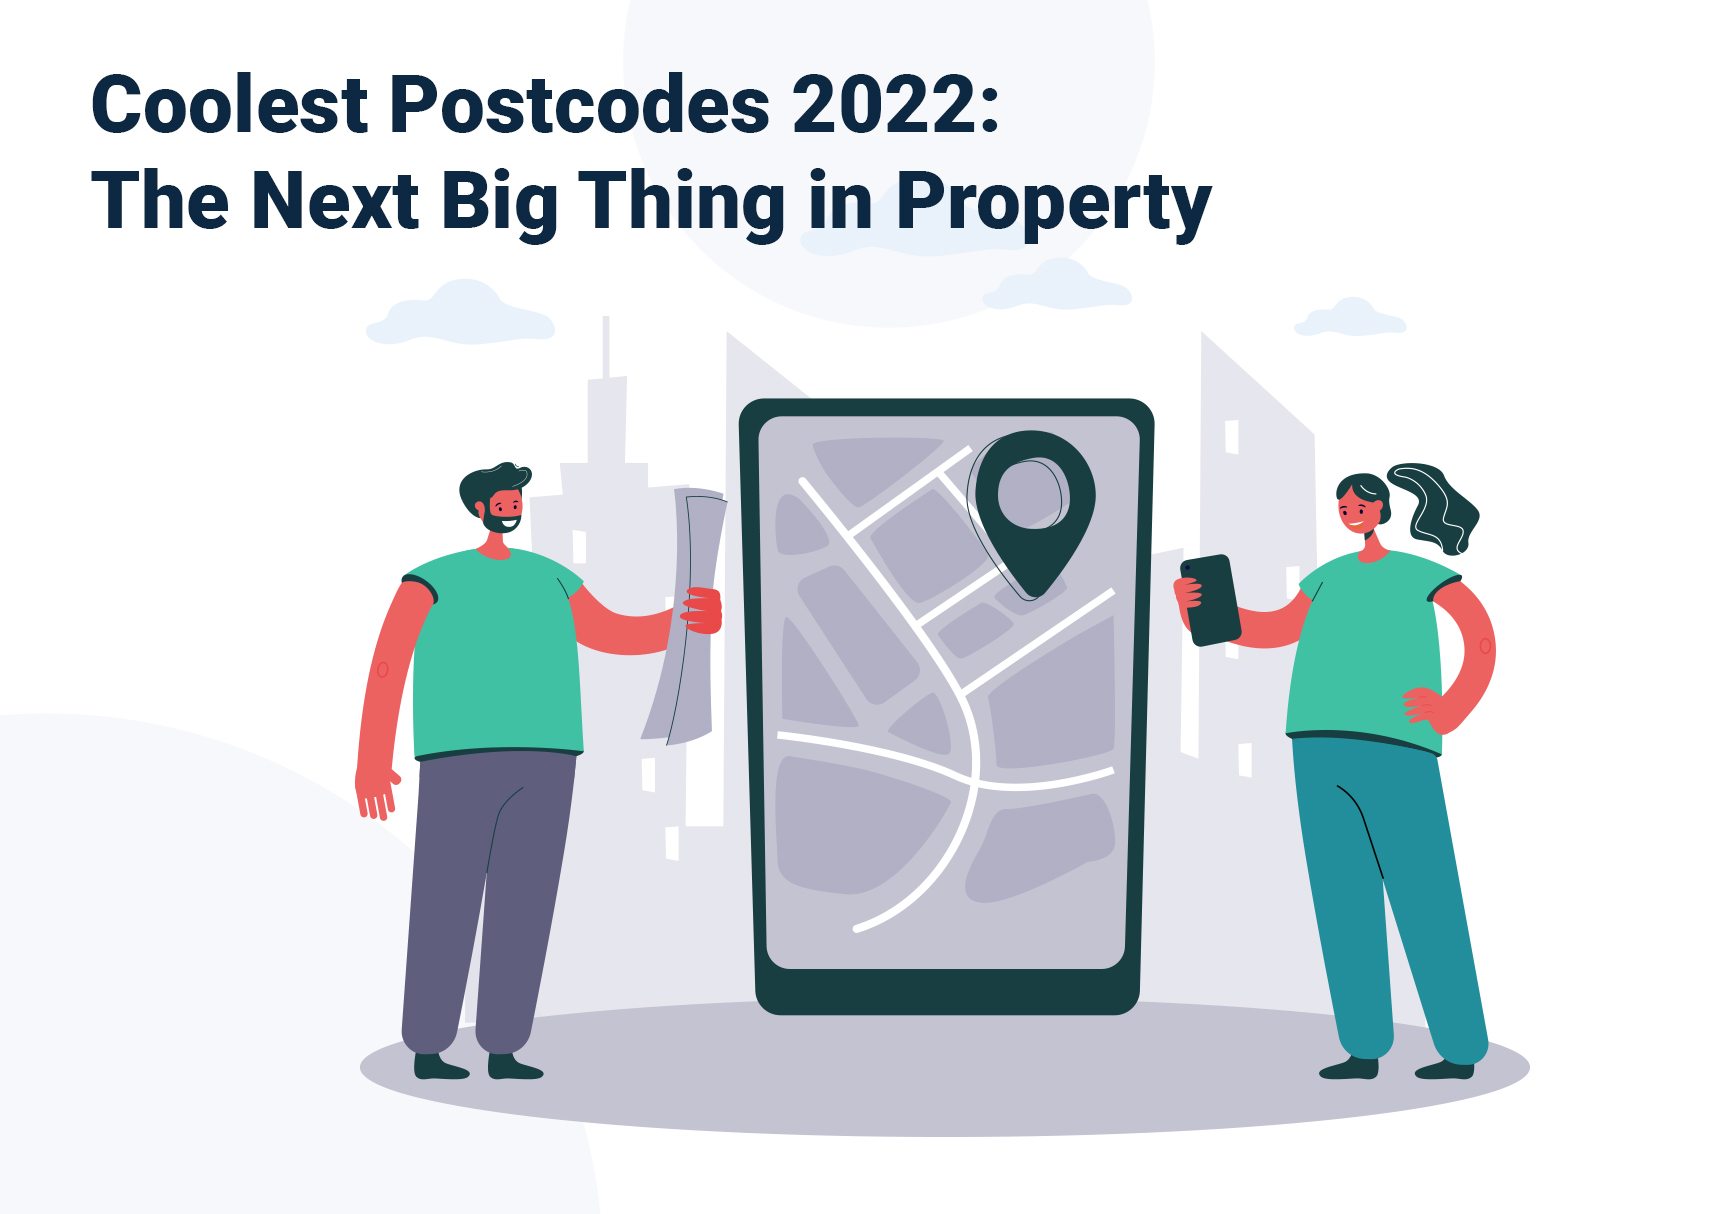 Coolest Postcodes: The Next Big Thing in Property